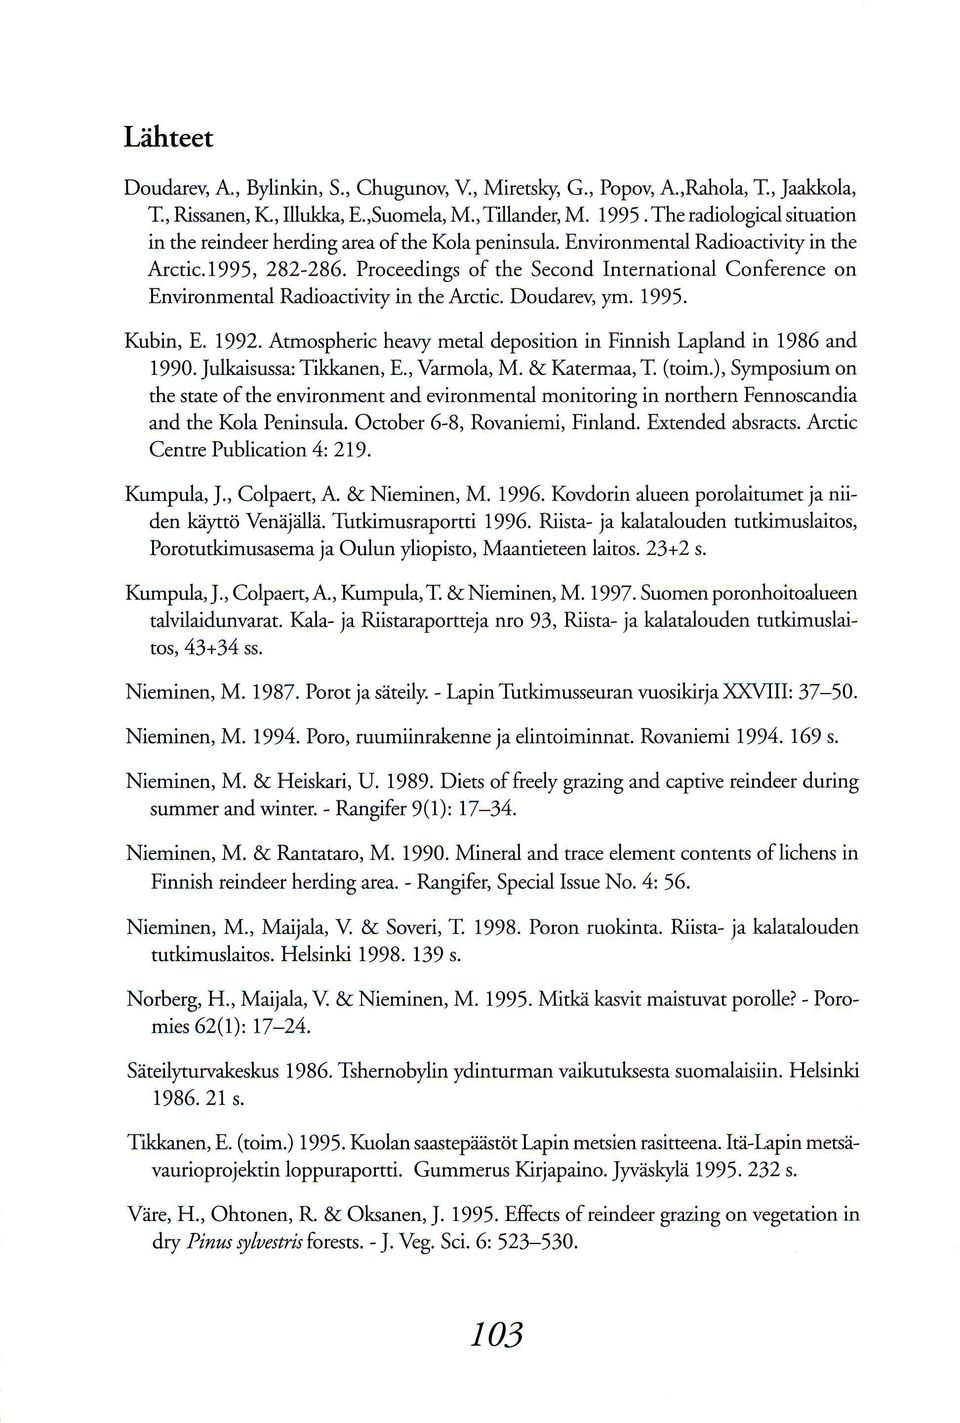 Proceedings of the Second International Conference on Environmental Radioactivity in the Arctic. Doudarev, ym. 1995. Kubin, E. 1992.